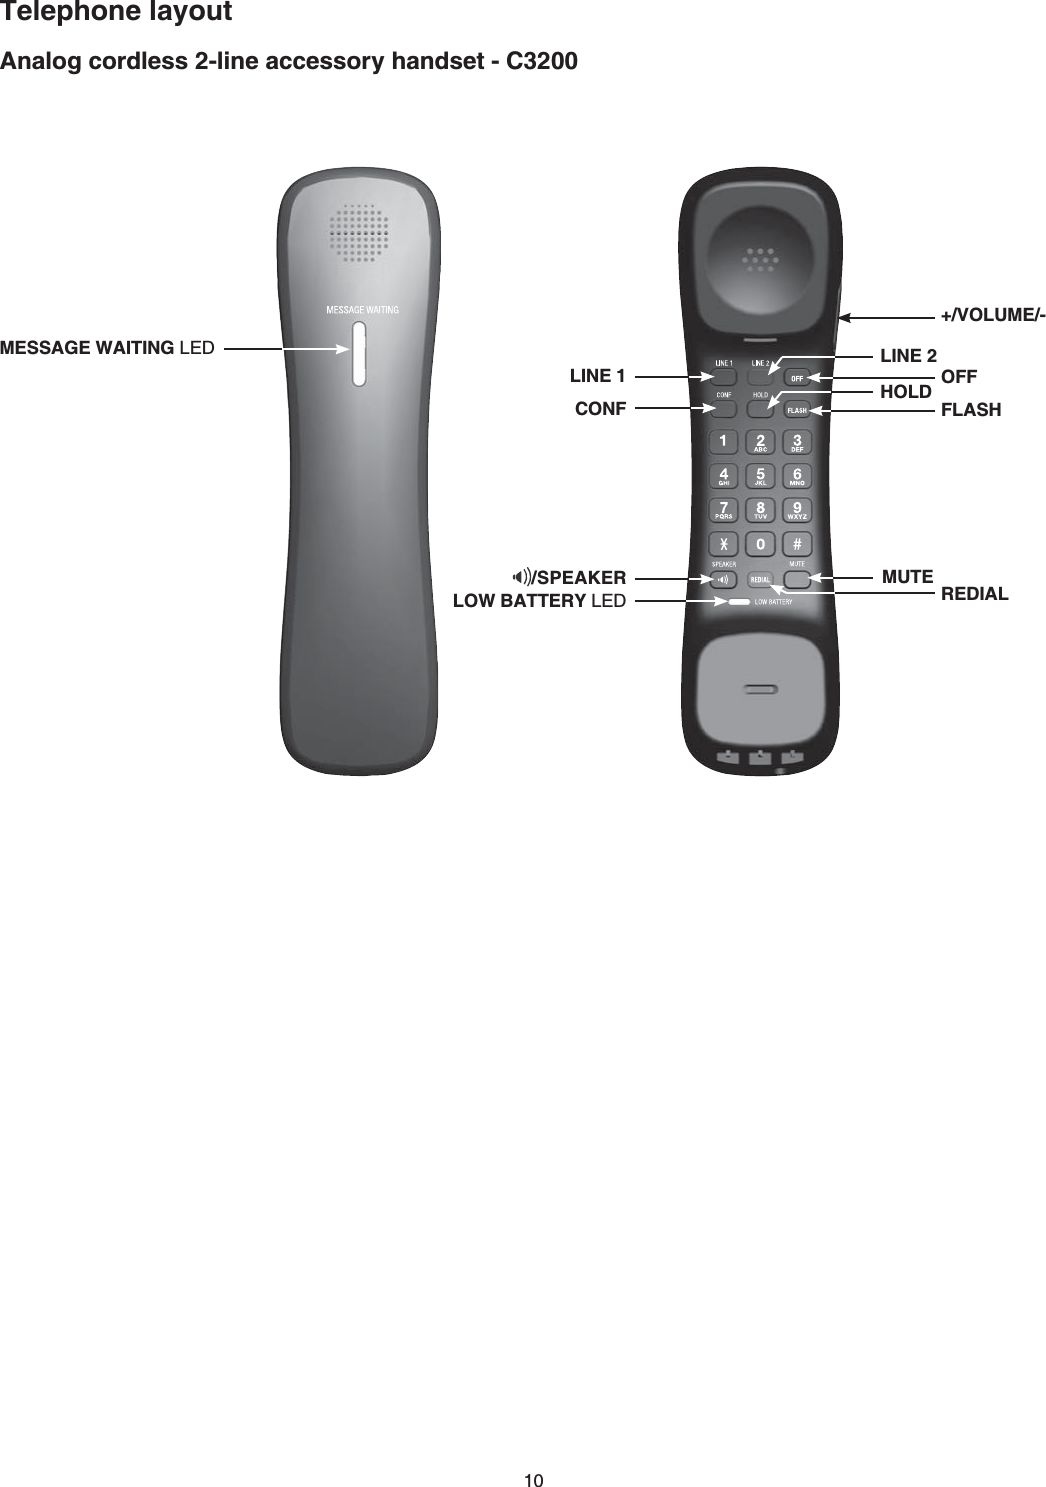 10Analog cordless 2-line accessory handset - C3200Telephone layoutLINE 1CONFLINE 2HOLD OFFFLASH/SPEAKER REDIALLOW BATTERY.&apos;&amp;MUTEMESSAGE WAITING.&apos;&amp;+/VOLUME/-